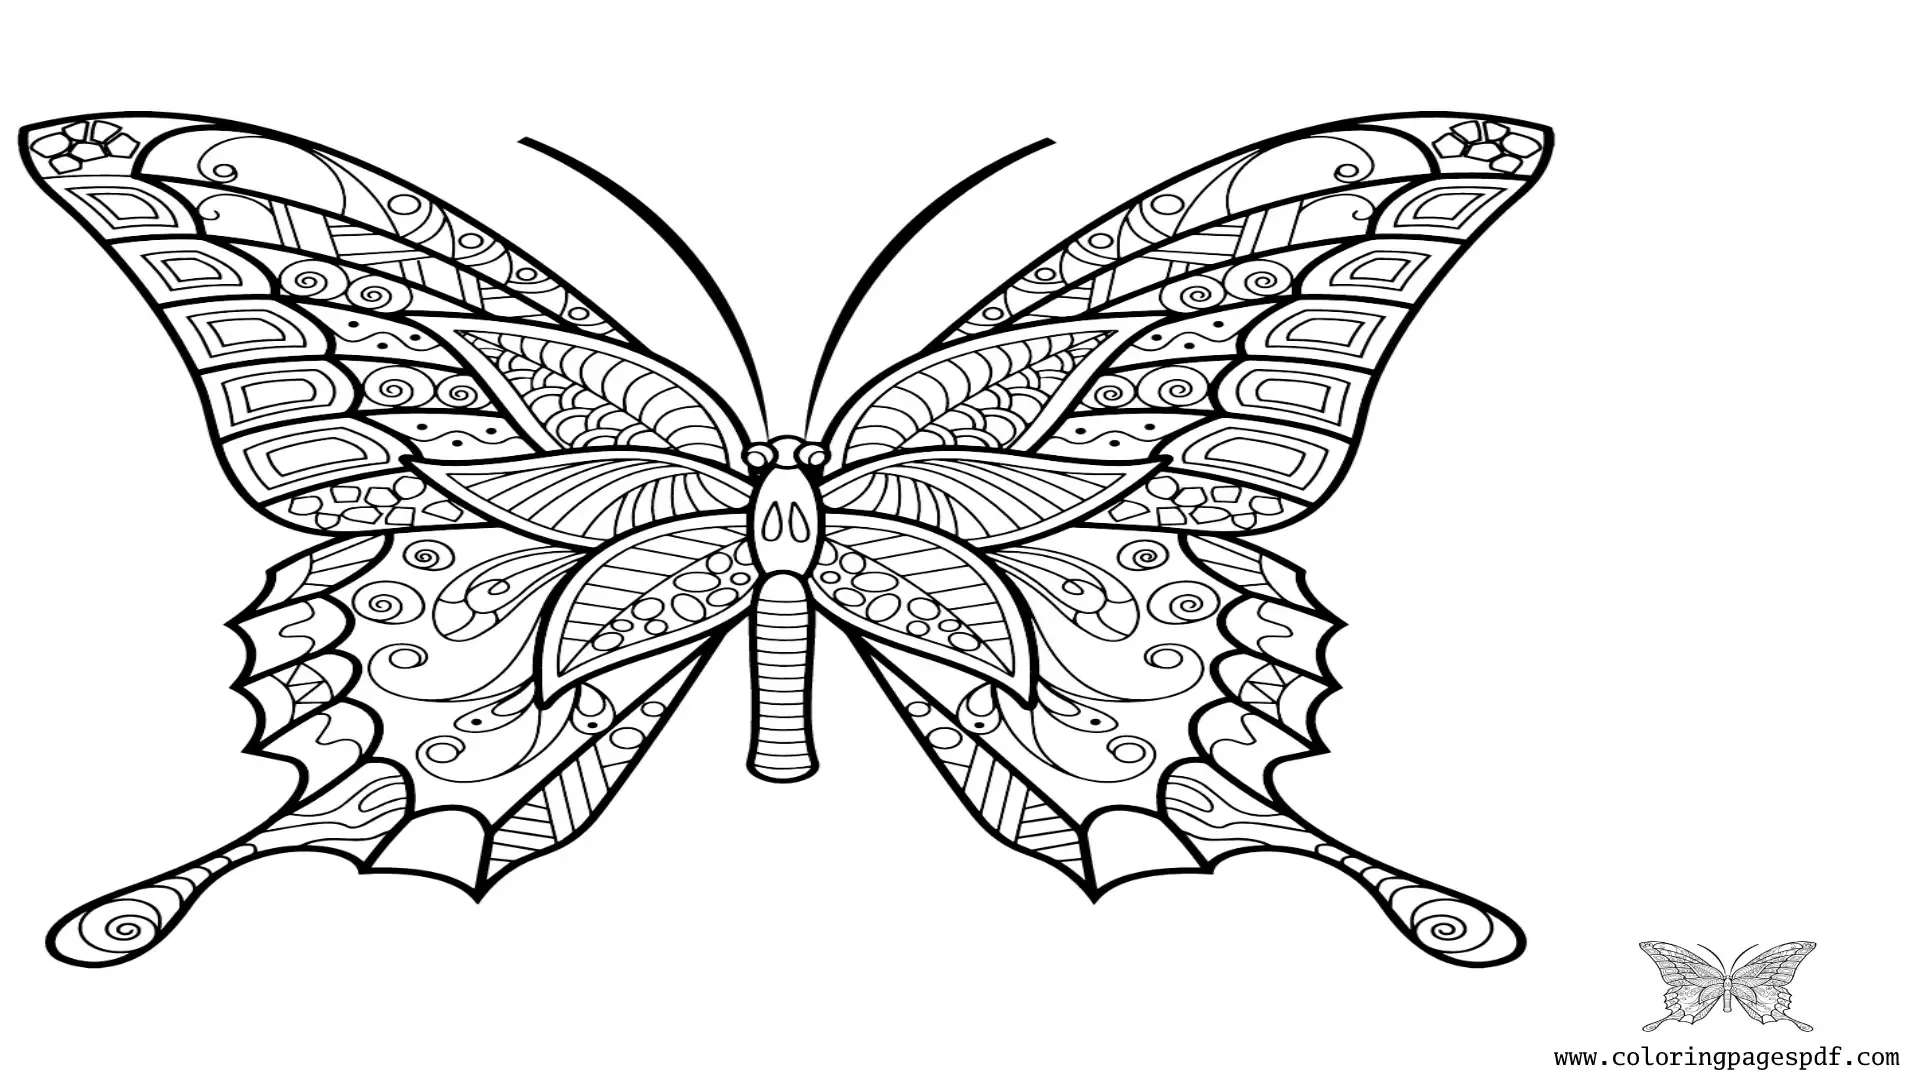 Coloring Page Of A Detailed Butterfly Mandala